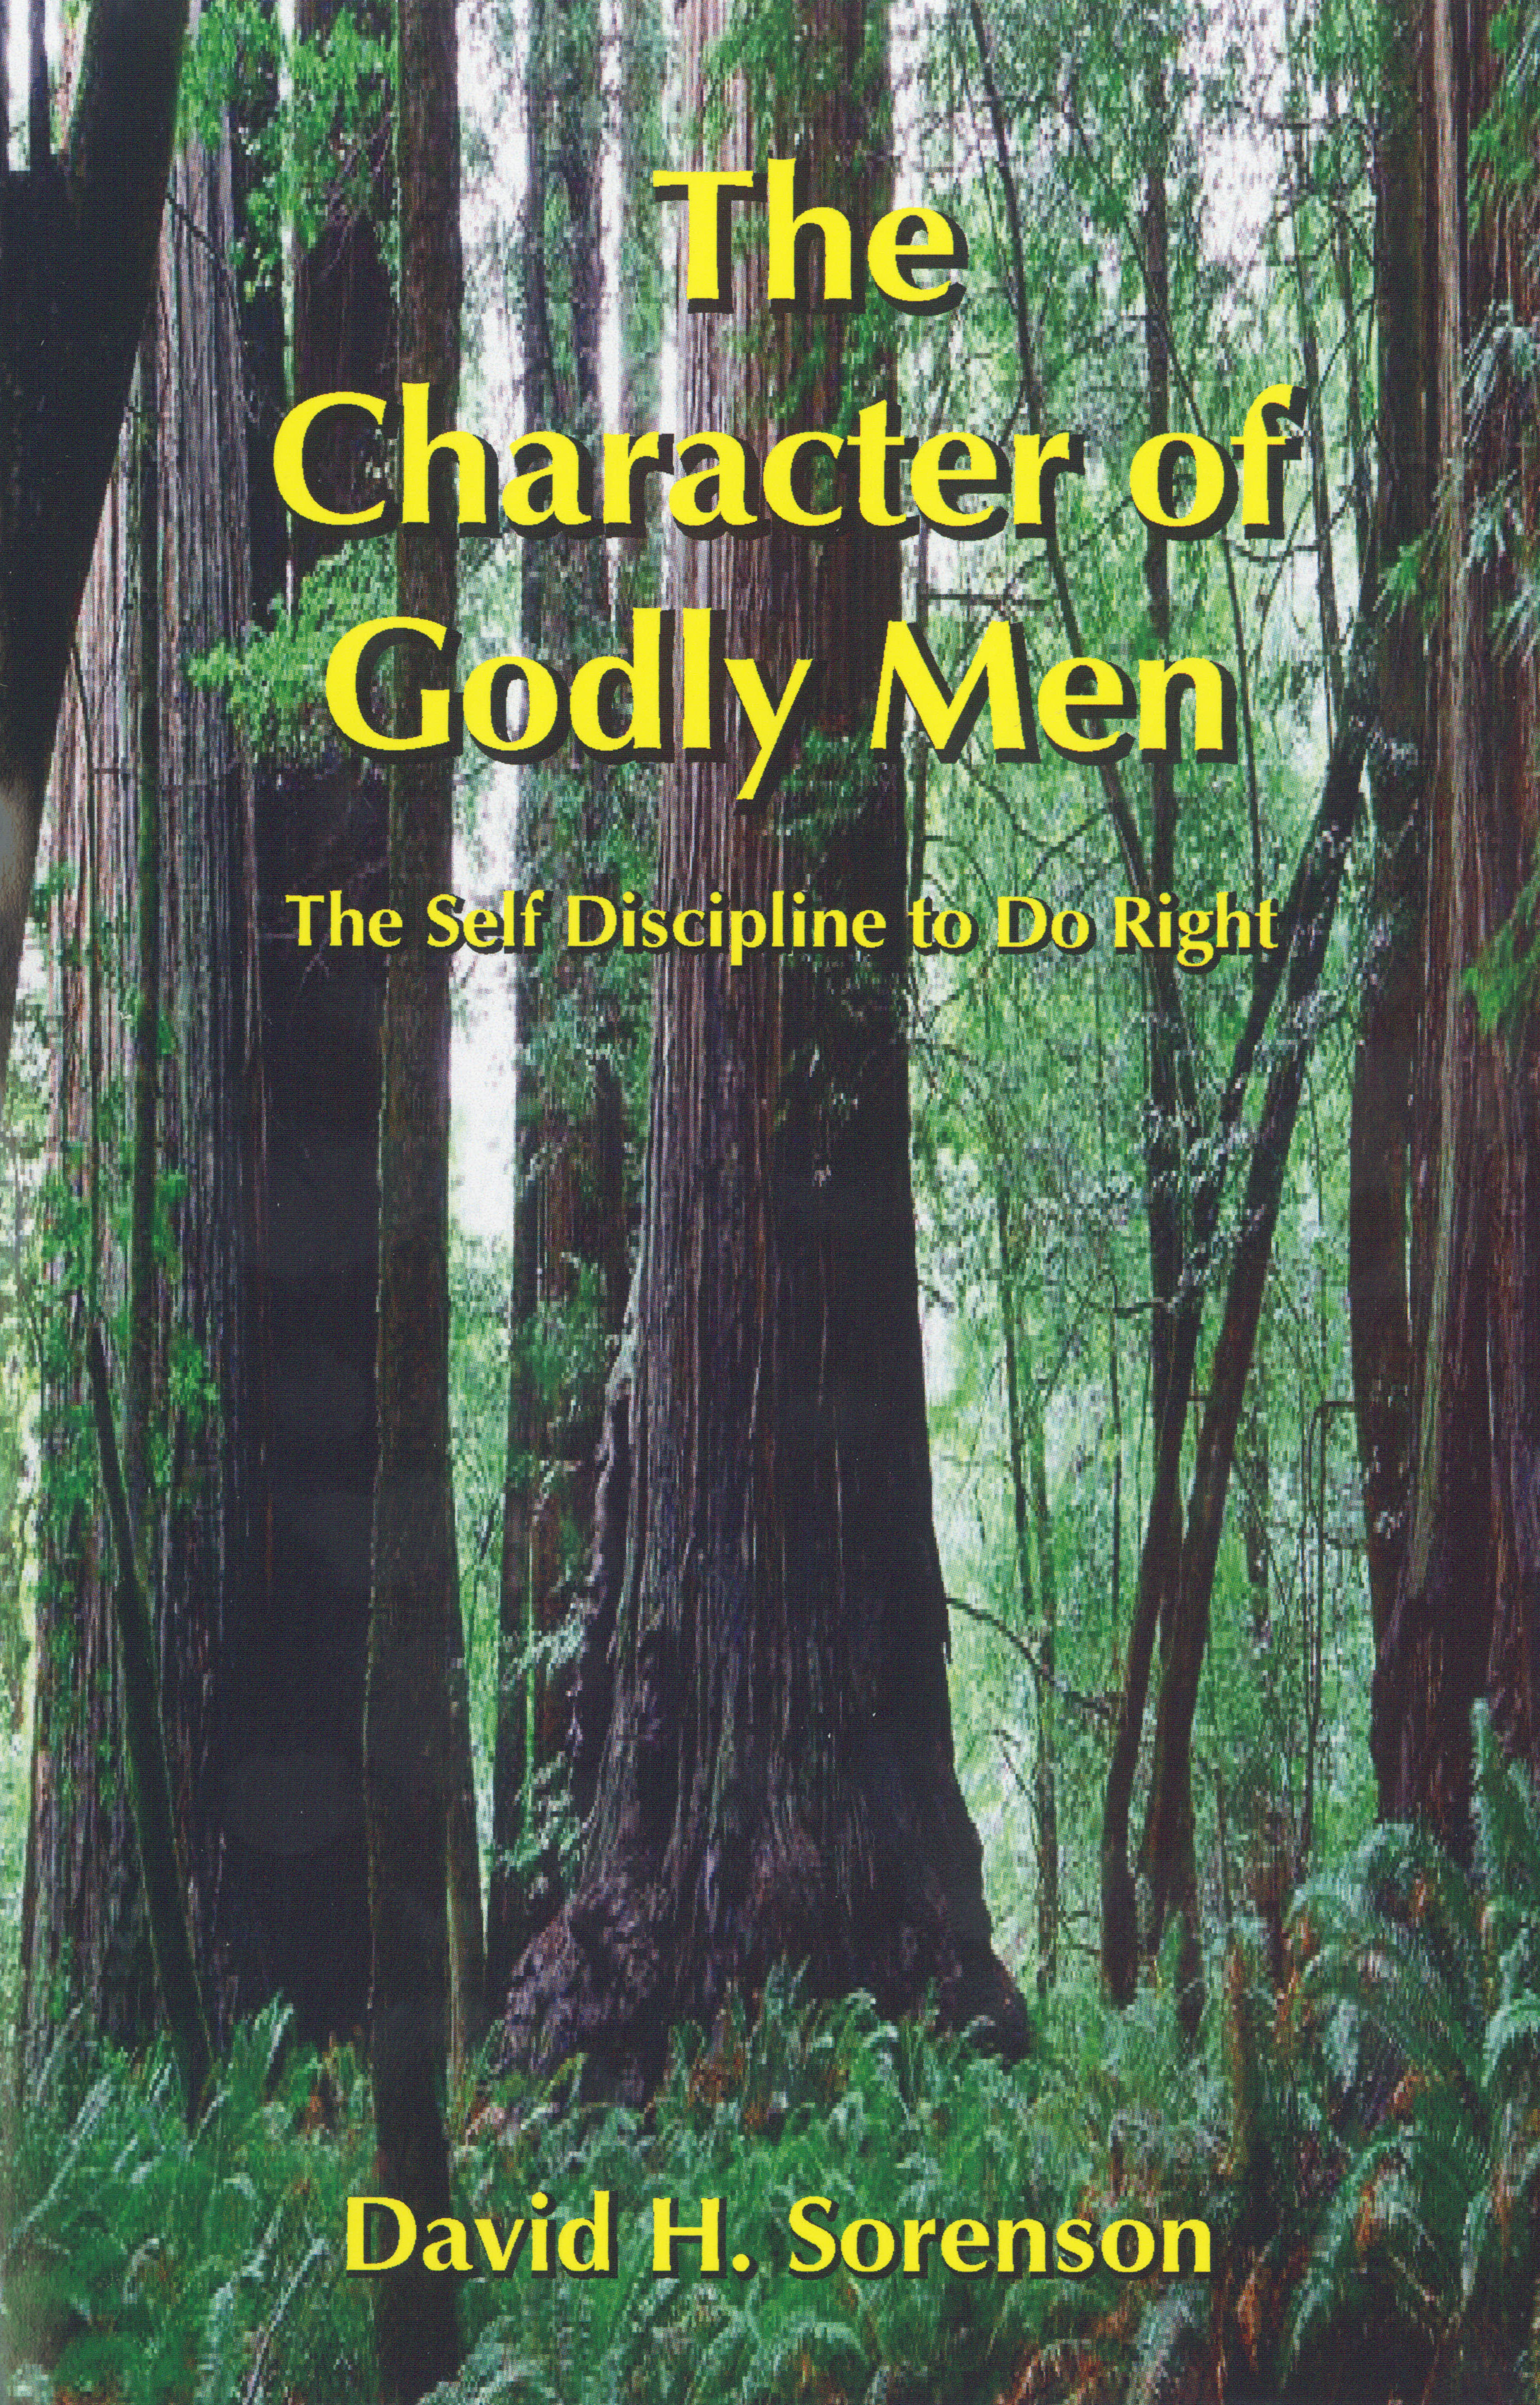 The Character of Godly Men